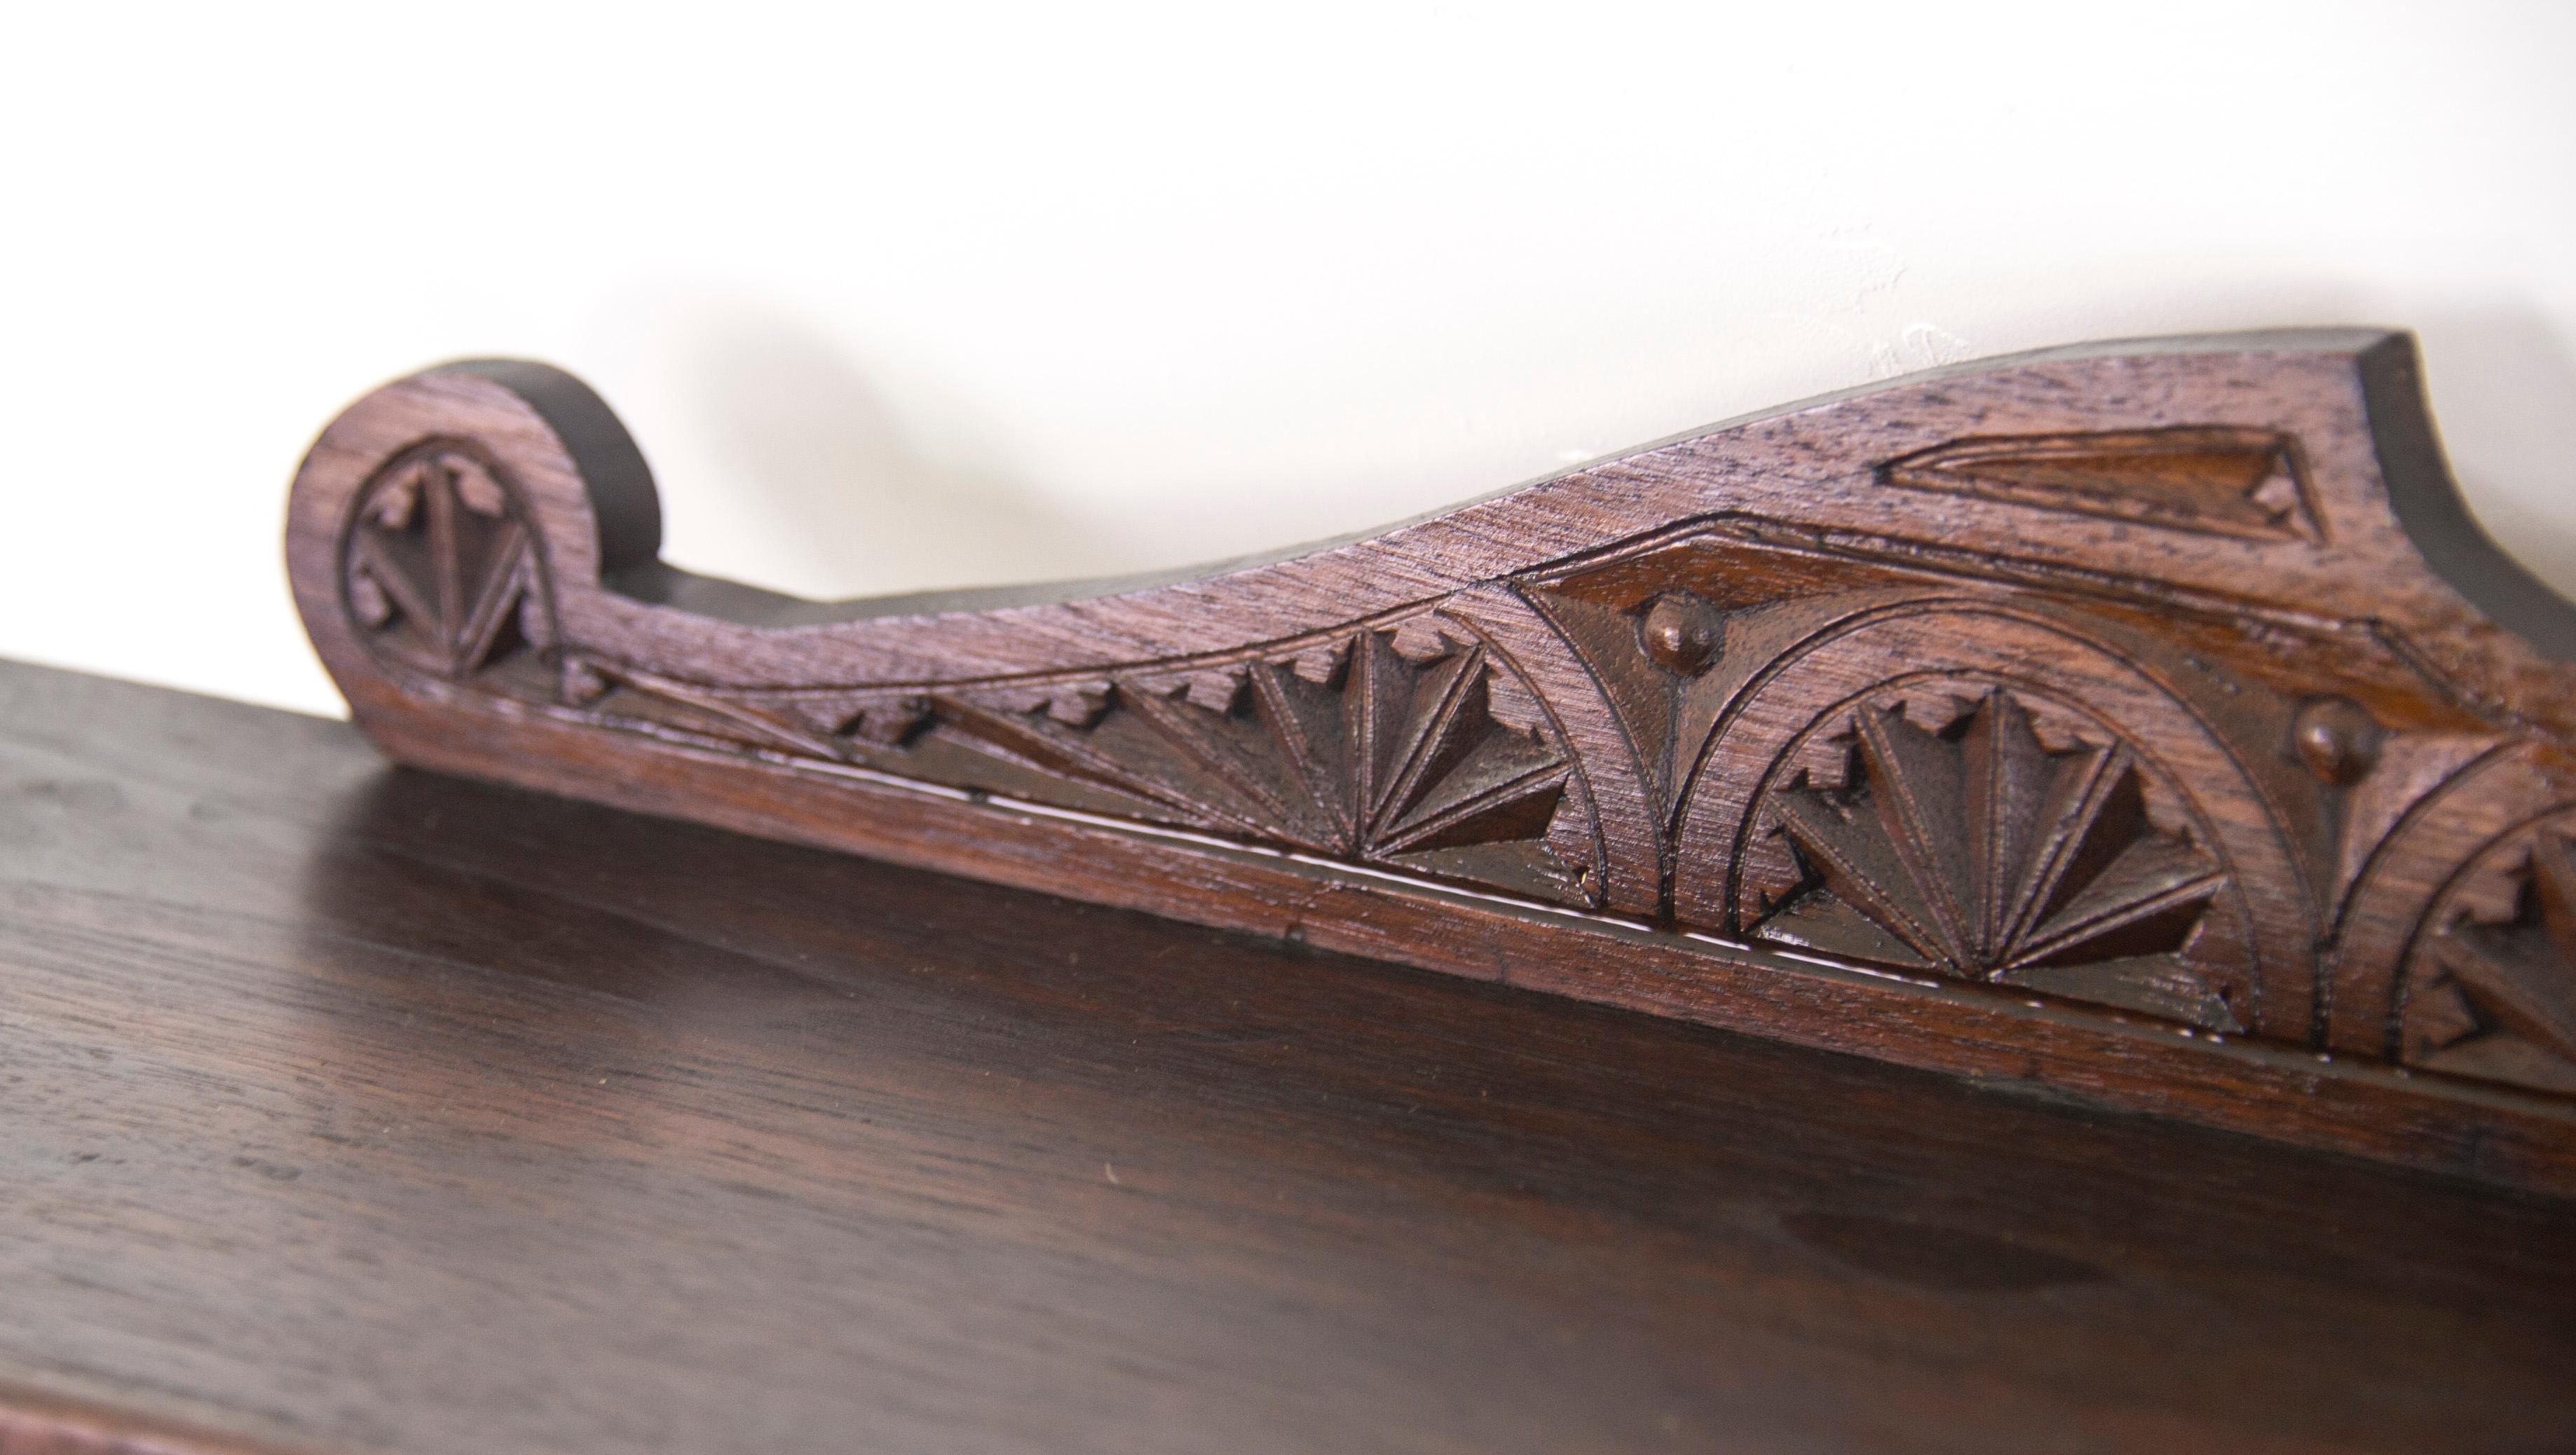 Hand-Crafted Antique Plate Rack, Solid Walnut, Victorian, Chip Carved, Hanging Shelf REDUCED!